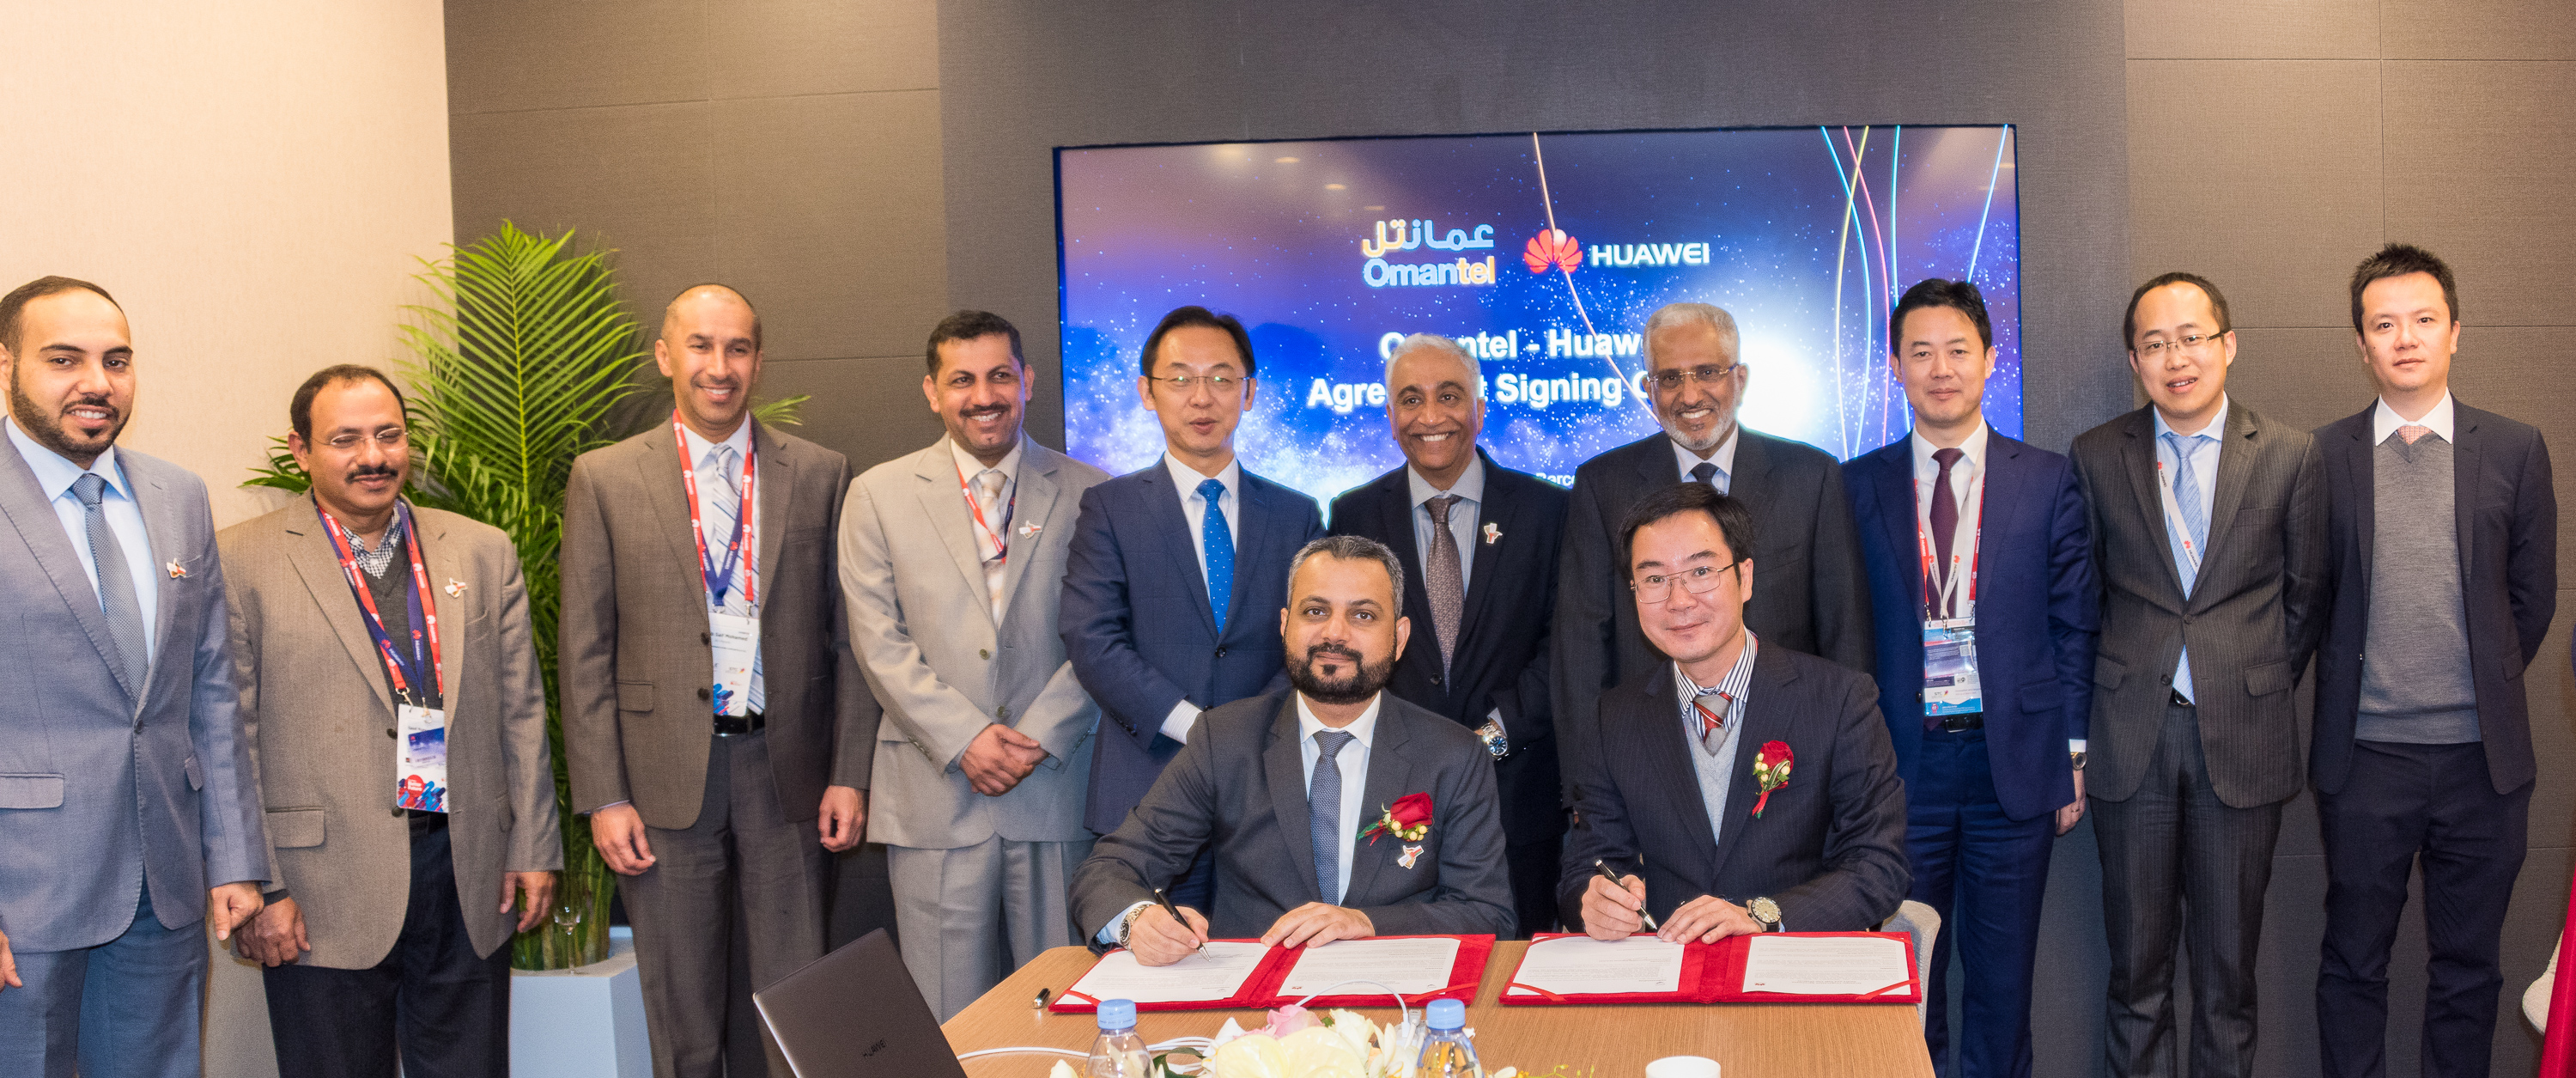 Omantel in partnership with Huawei for smart city initiative